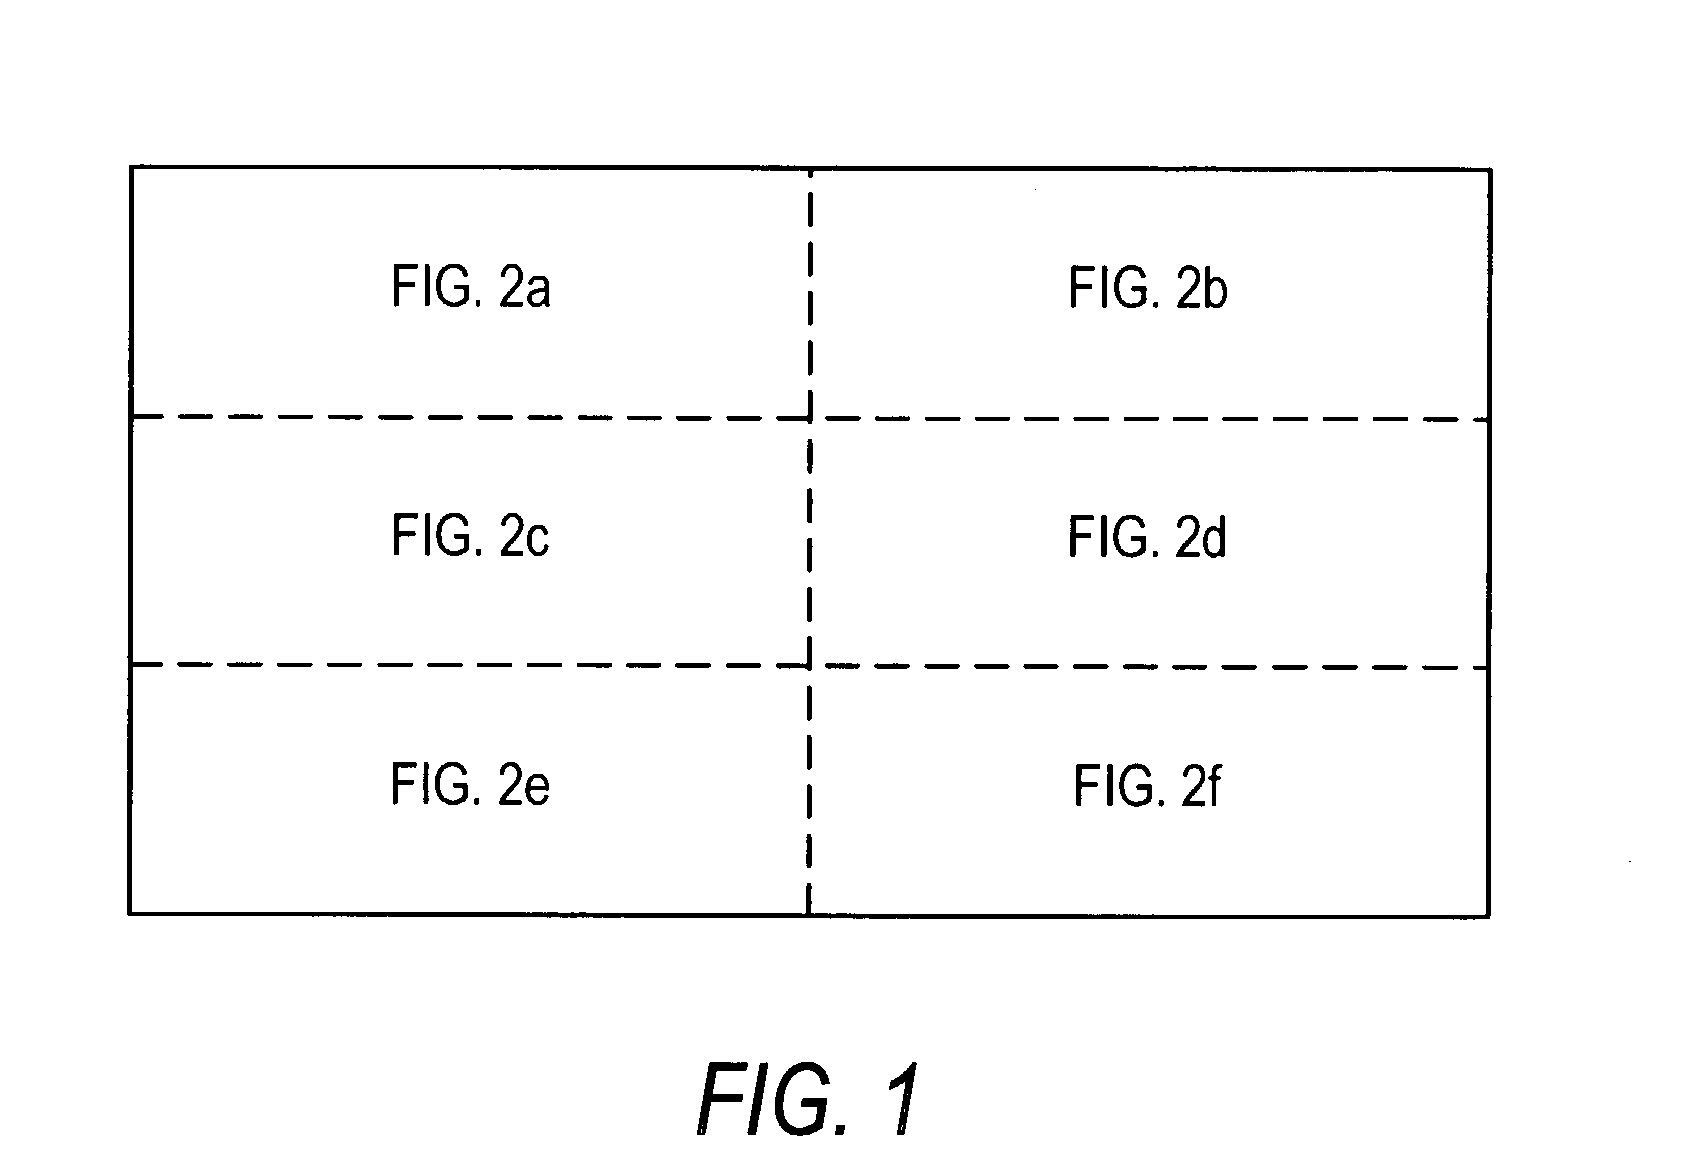 Clock signal circuitry for multi-protocol high-speed serial interface circuitry